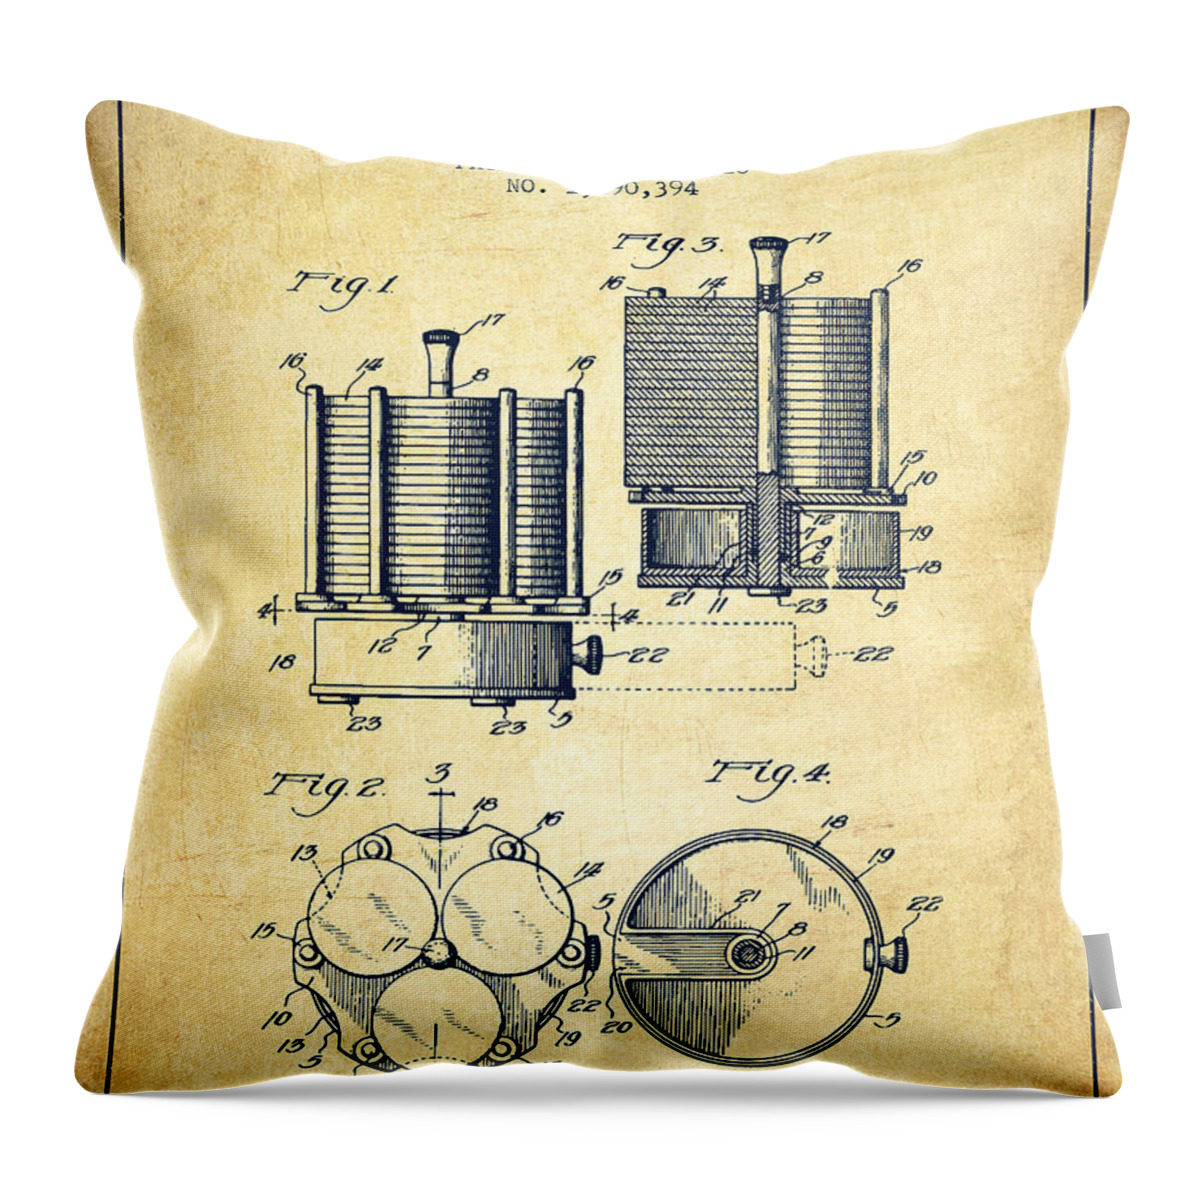 Poker Throw Pillow featuring the digital art Poker Chip Set Patent from 1928 - Vintage by Aged Pixel